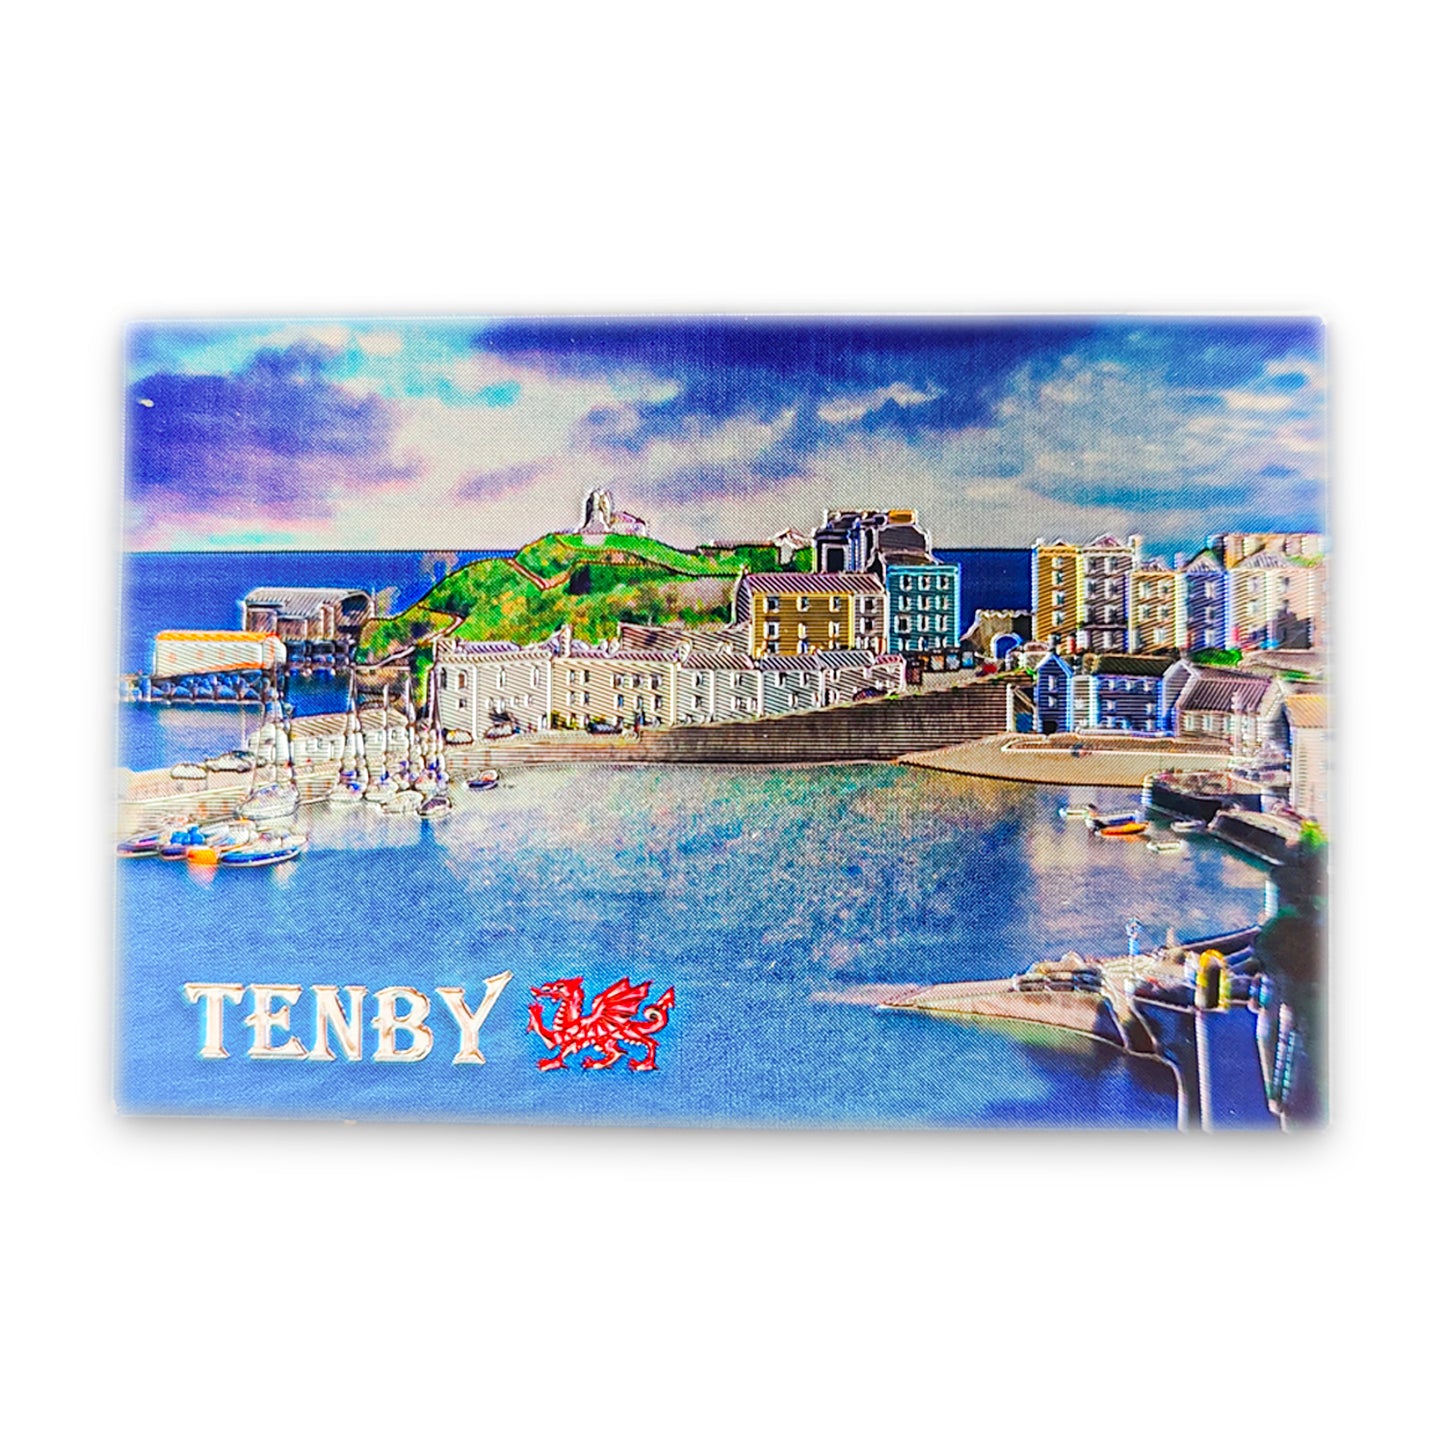 Tenby Blue Sky View Magnet (MGF021)